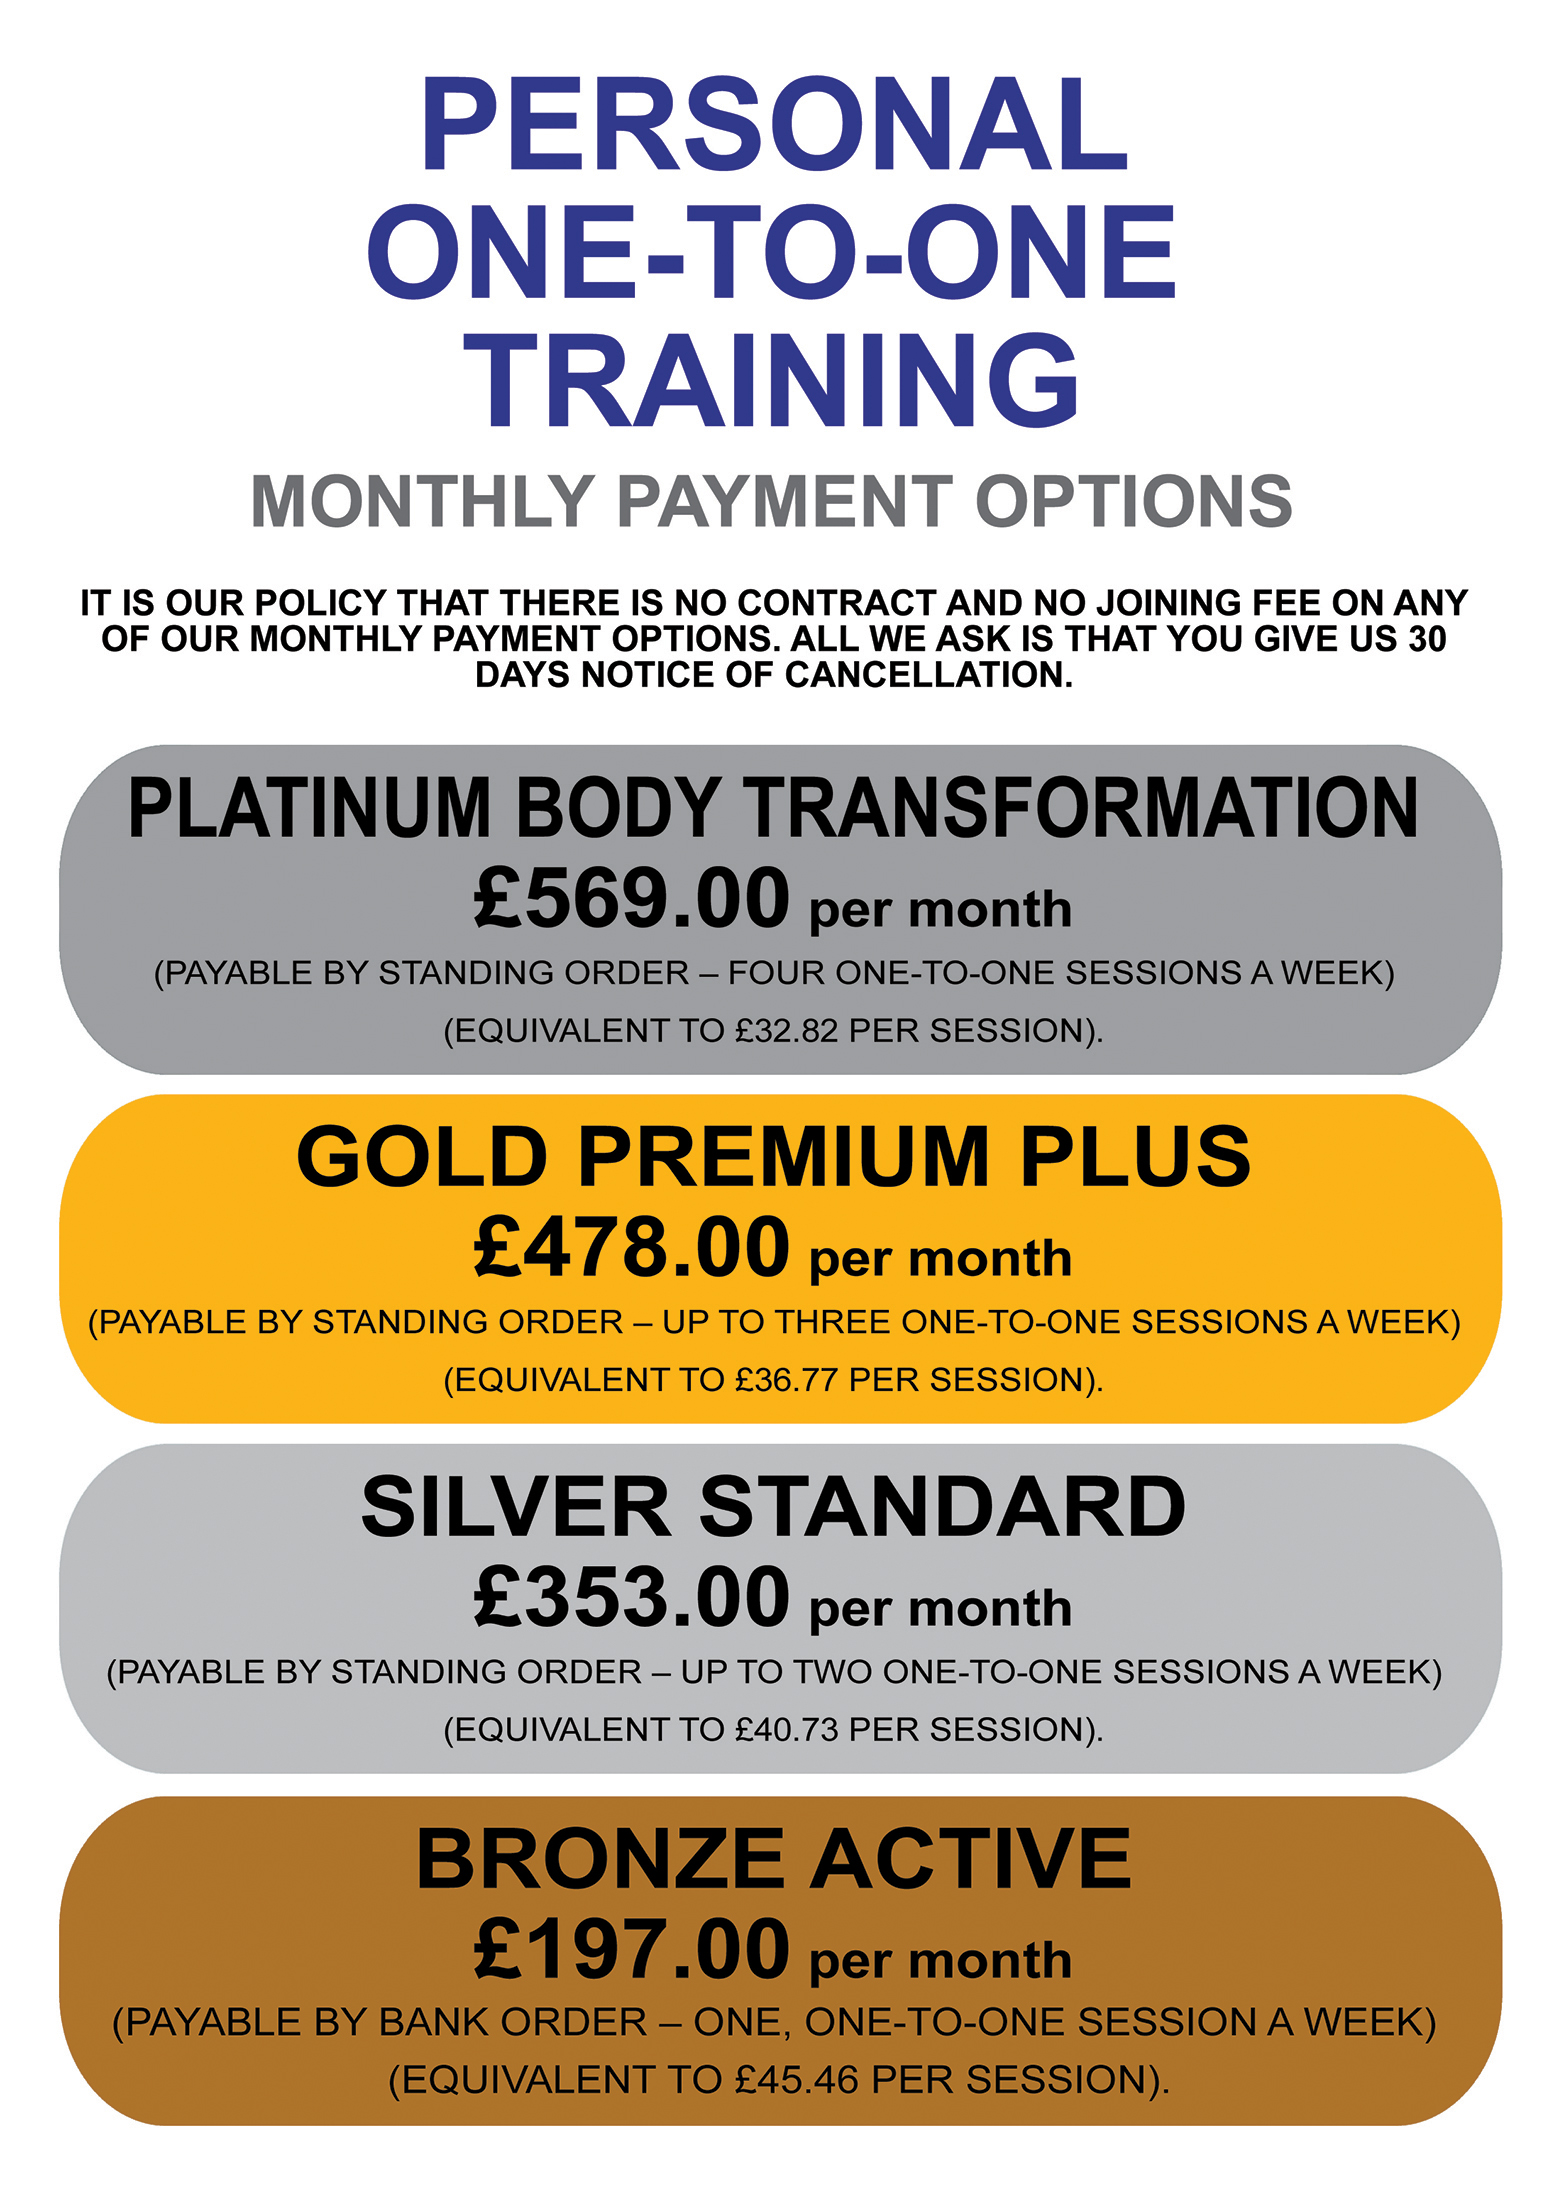 Online Personal Training Prices: Everything You Need to Know The